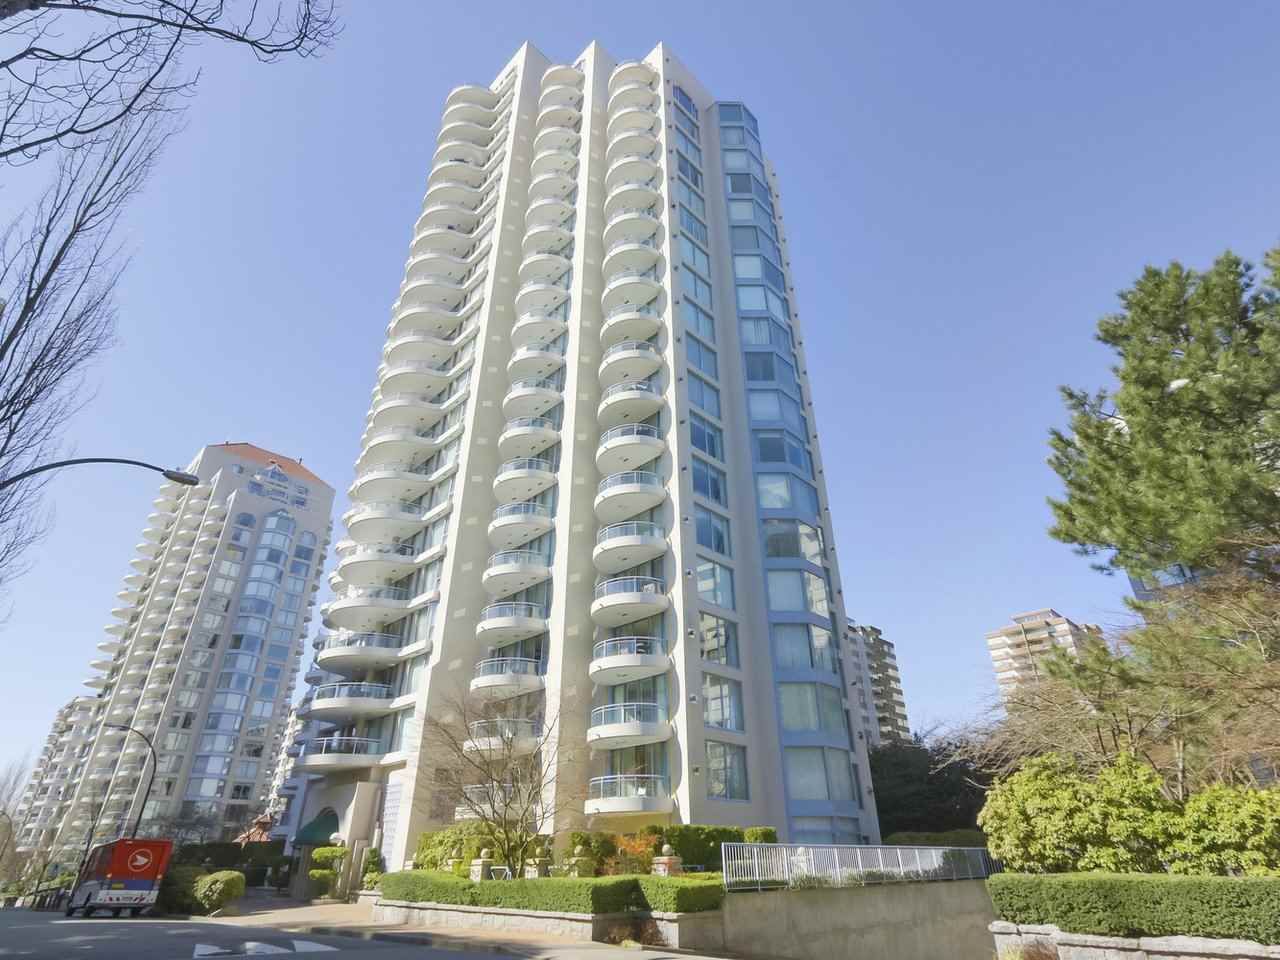 Main Photo: 803 719 PRINCESS STREET in New Westminster: Uptown NW Condo for sale : MLS®# R2417616